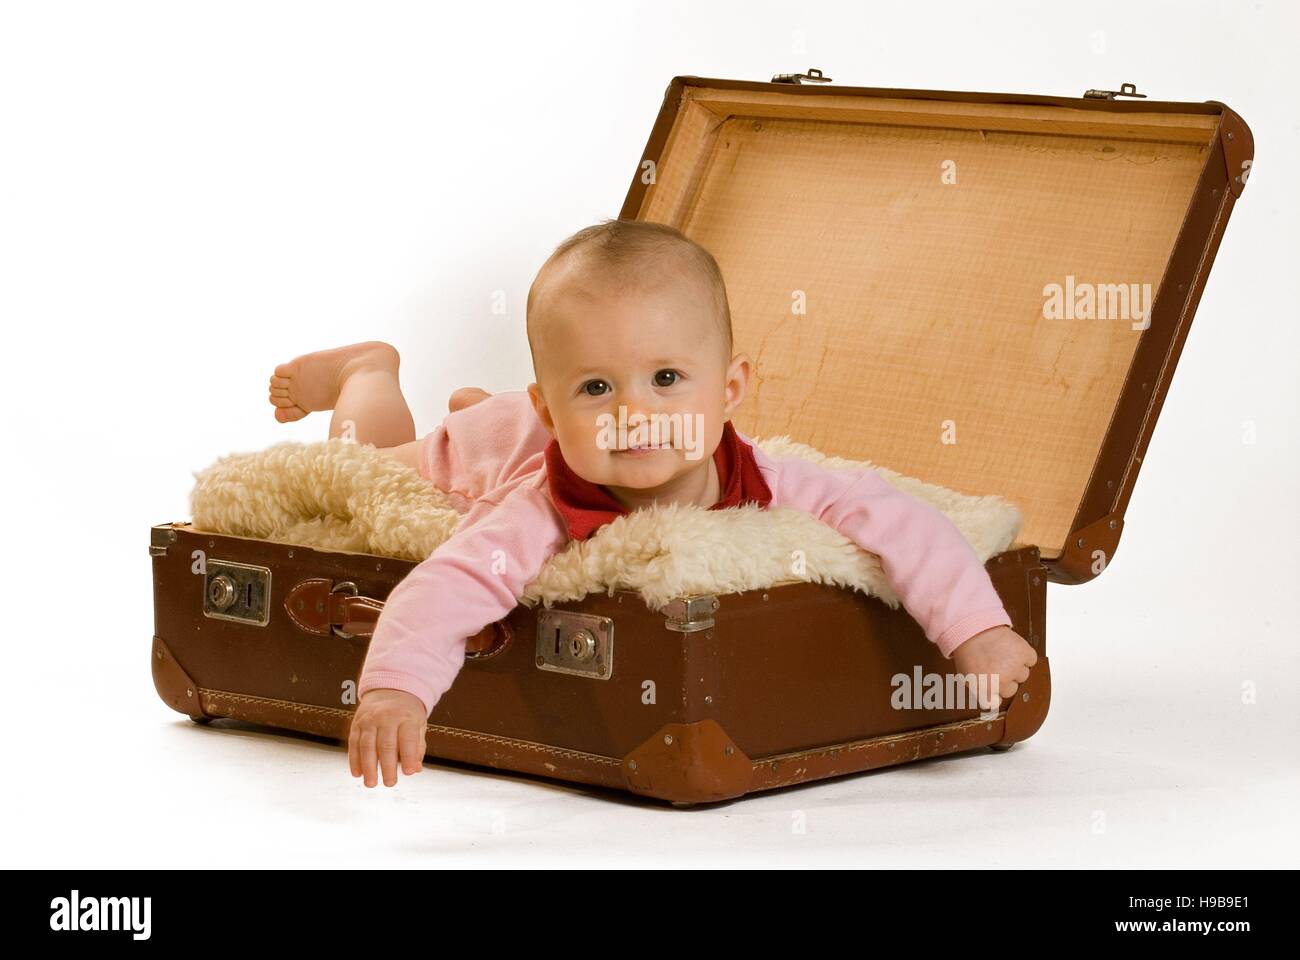 Baby girl, 6 month old, suitcase Stock Photo